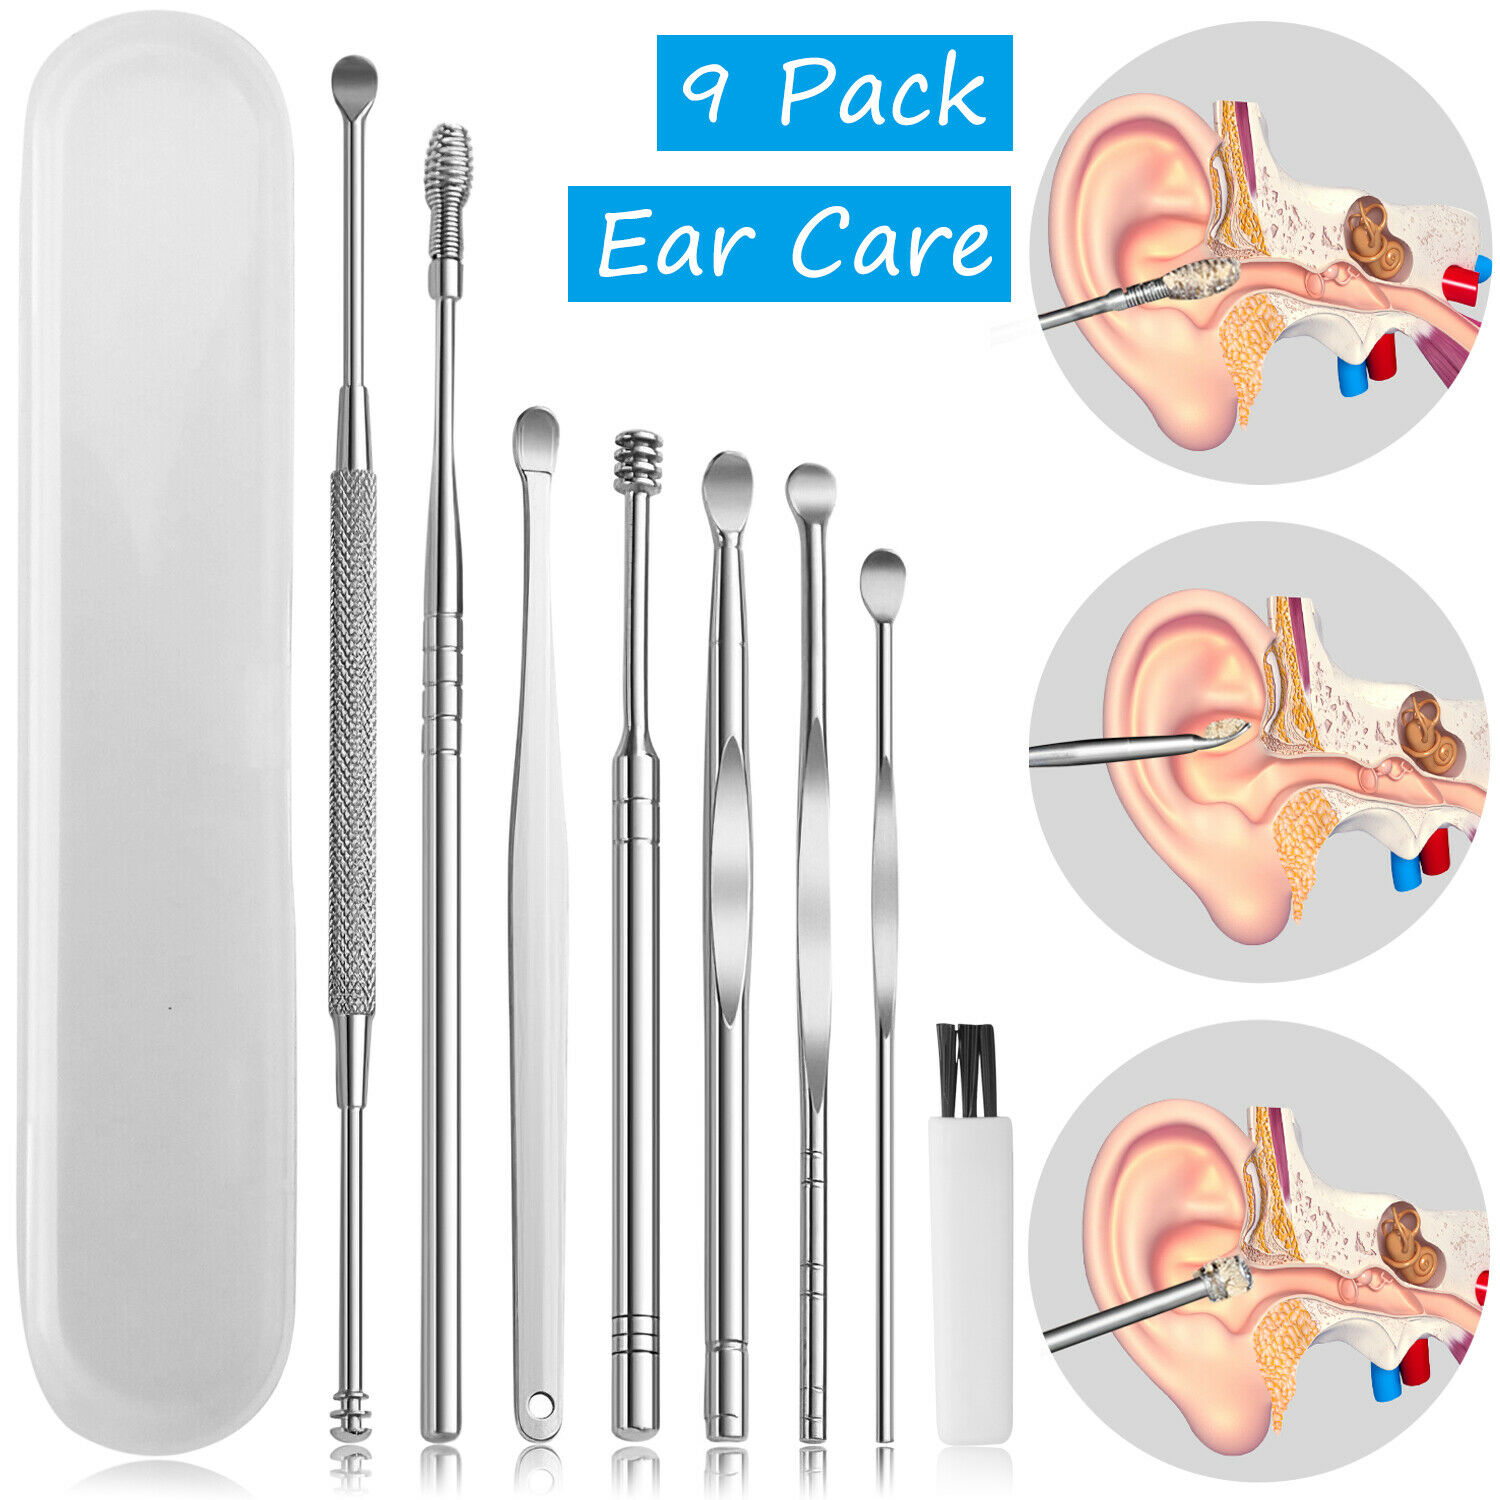 Ear Wax Removal Kit Cleaning Tool Earwax Pick Cleaner Remover Curette Spoon Set